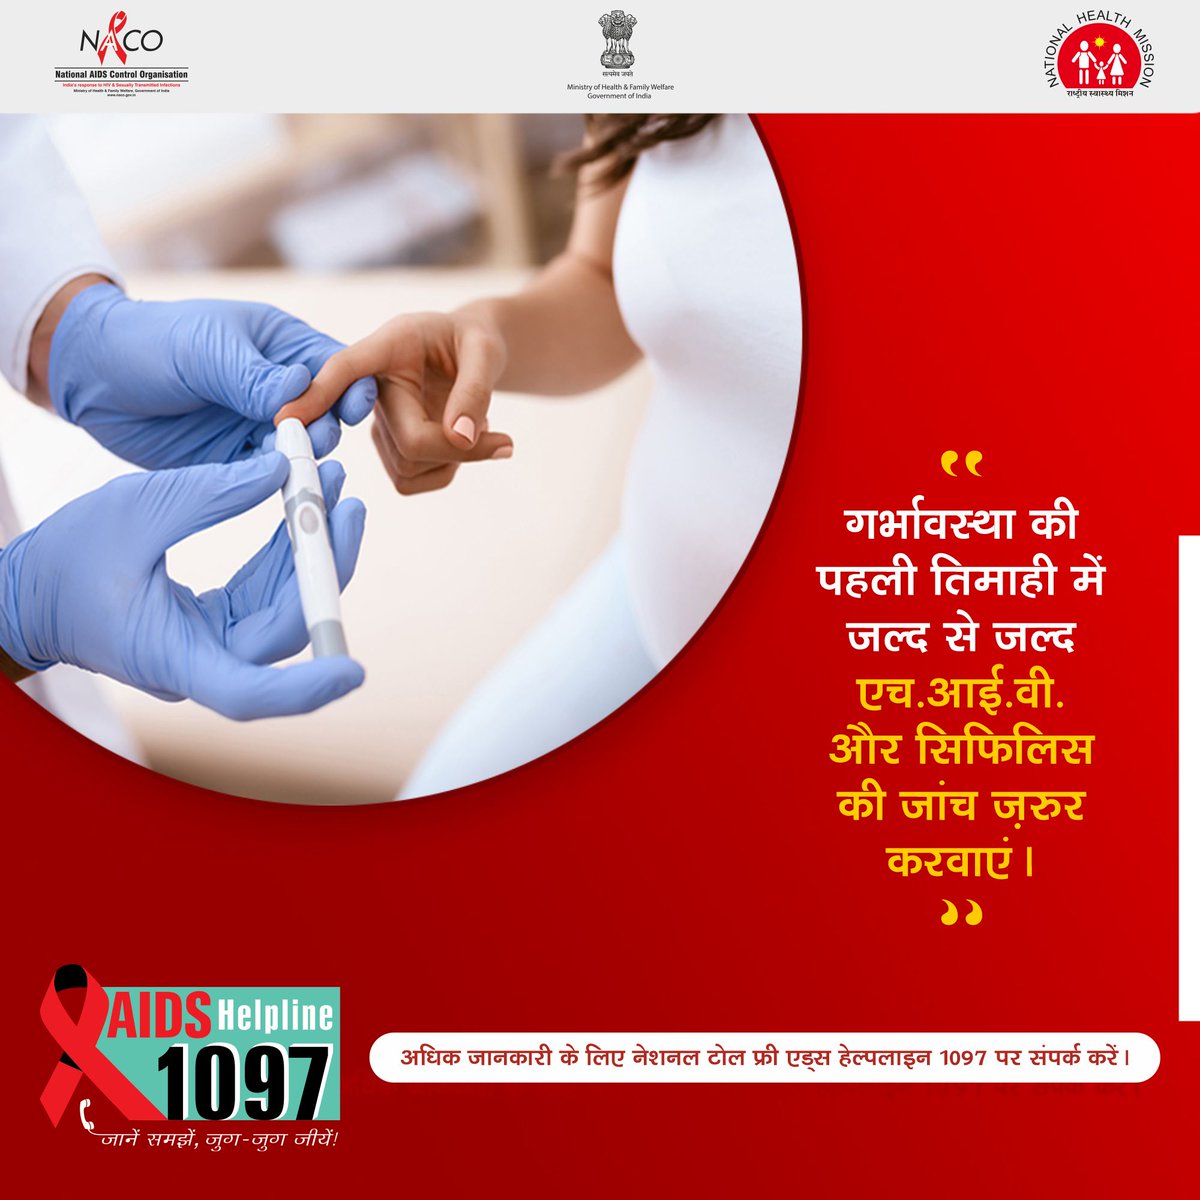 Get tested for #HIV and #Syphilis in the first trimester of pregnancy, and prevent its transmission to the baby. #SyphilisPrevention #IndiaFightsHIVandSTI #LetCommunitiesLead #NACOApp #dial1097 #HIV #AIDS #goasacs